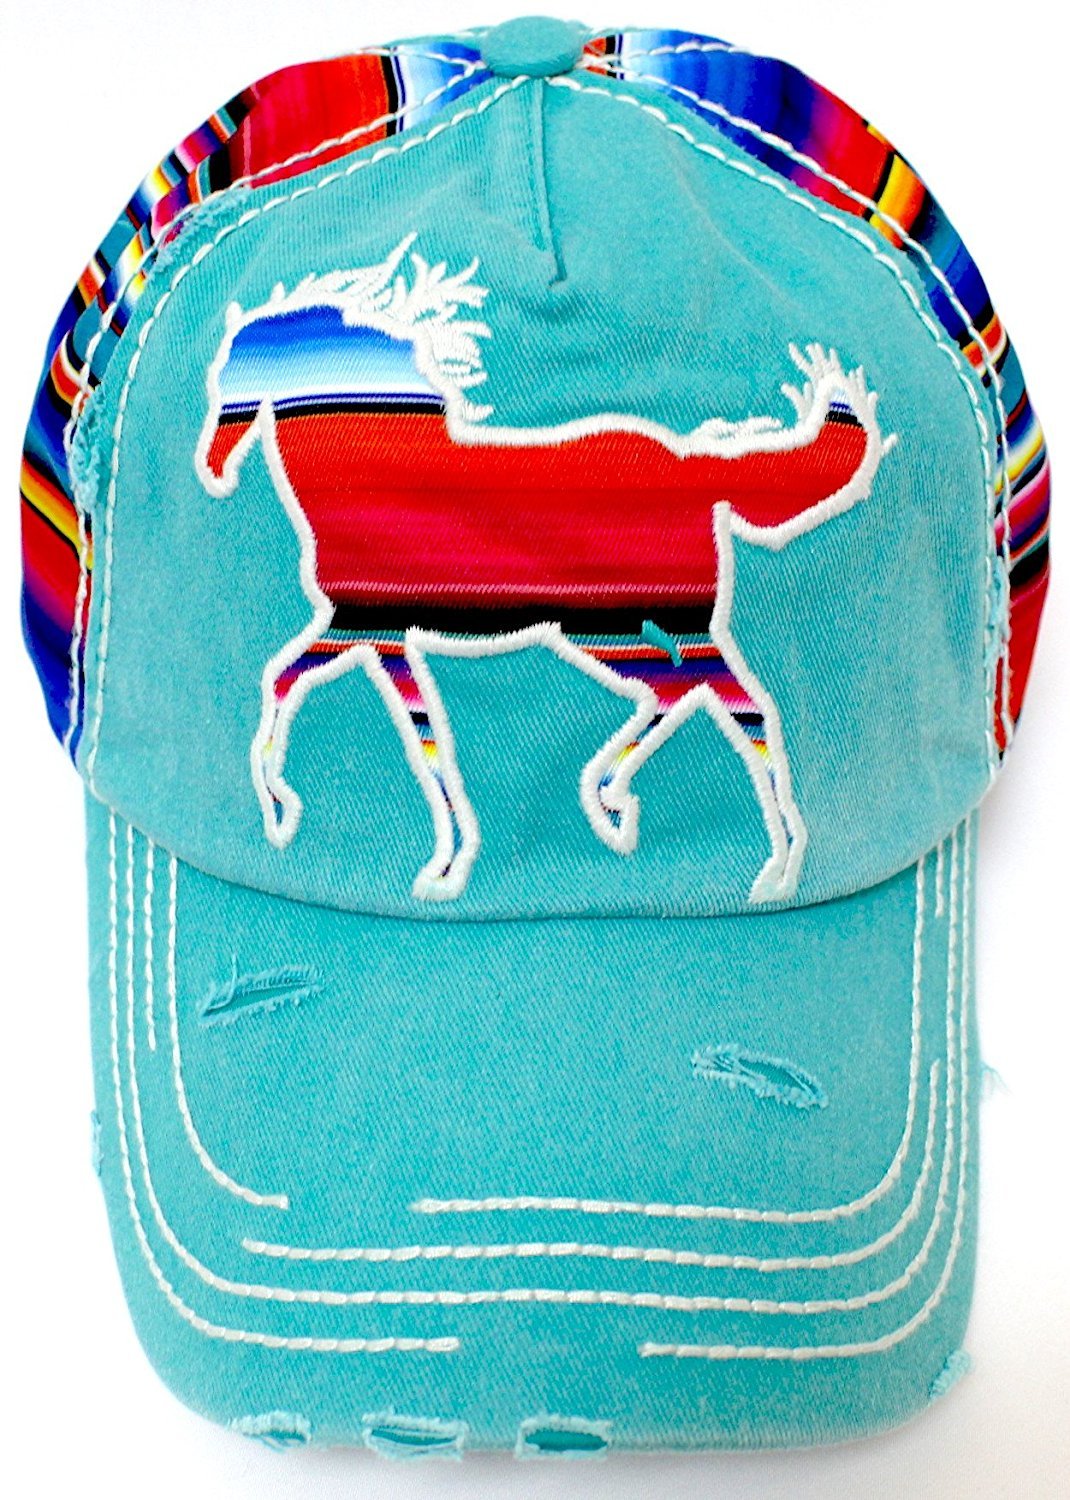 Turquoise Serape Colored MUSTANG Patch Embroidery Hat - Caps 'N Vintage 